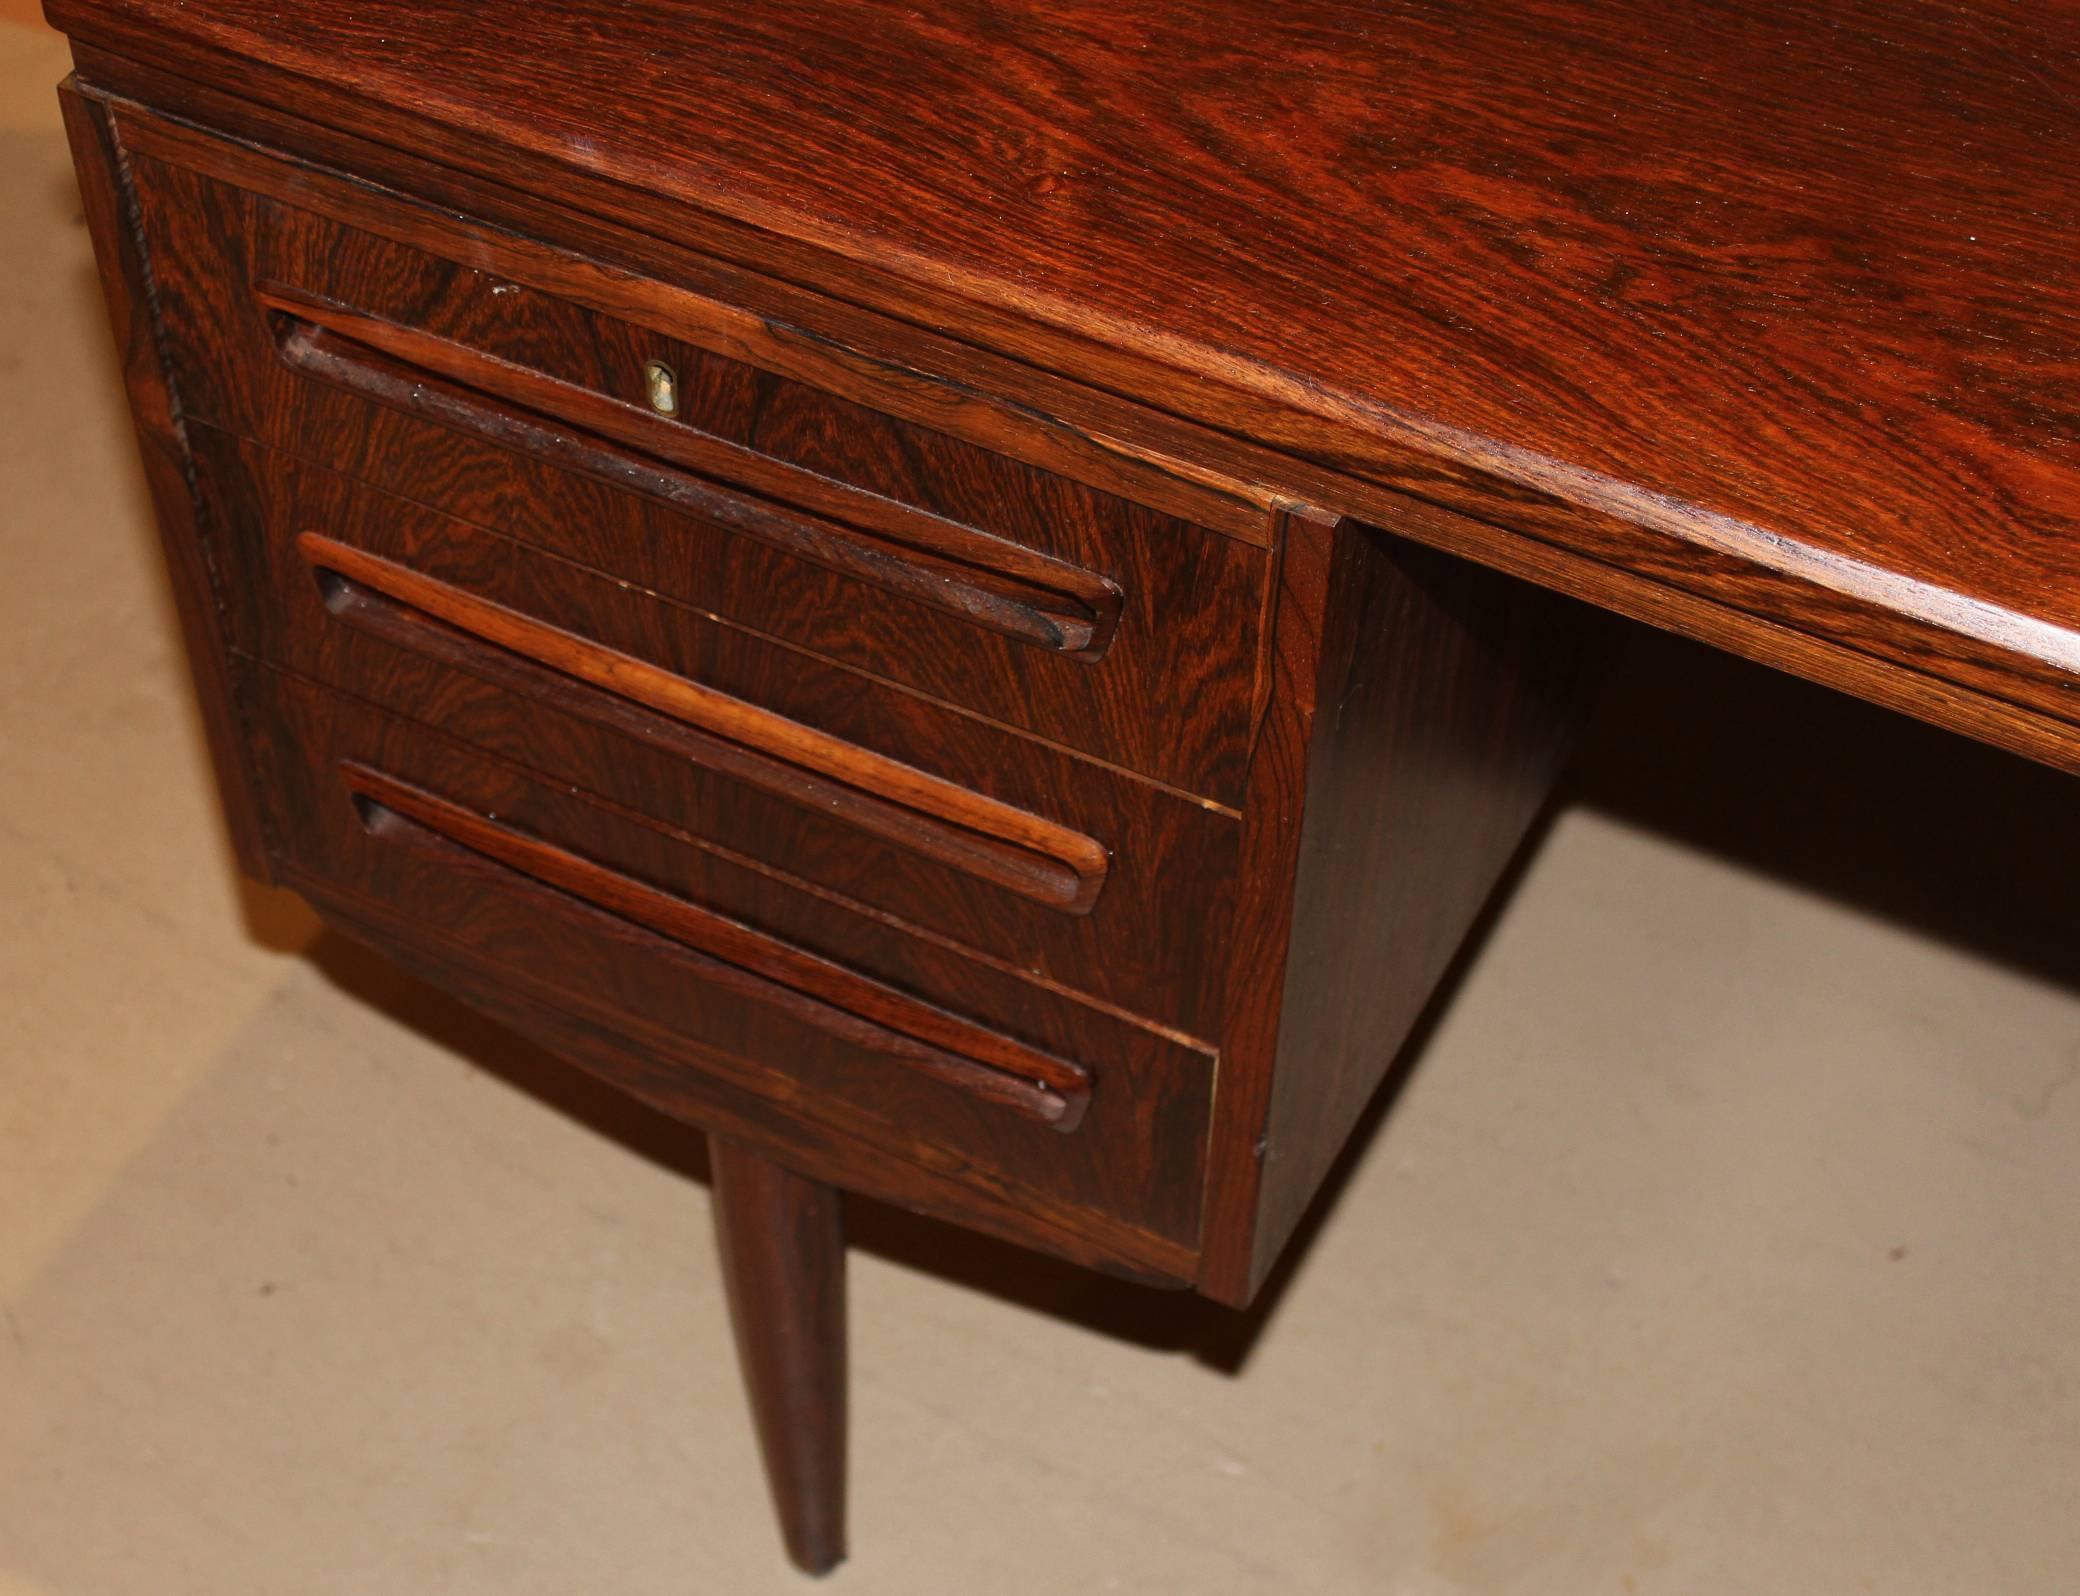 Hand-Crafted Danish Mid-Century Modern Brazilian Rosewood Executive Desk with Bar